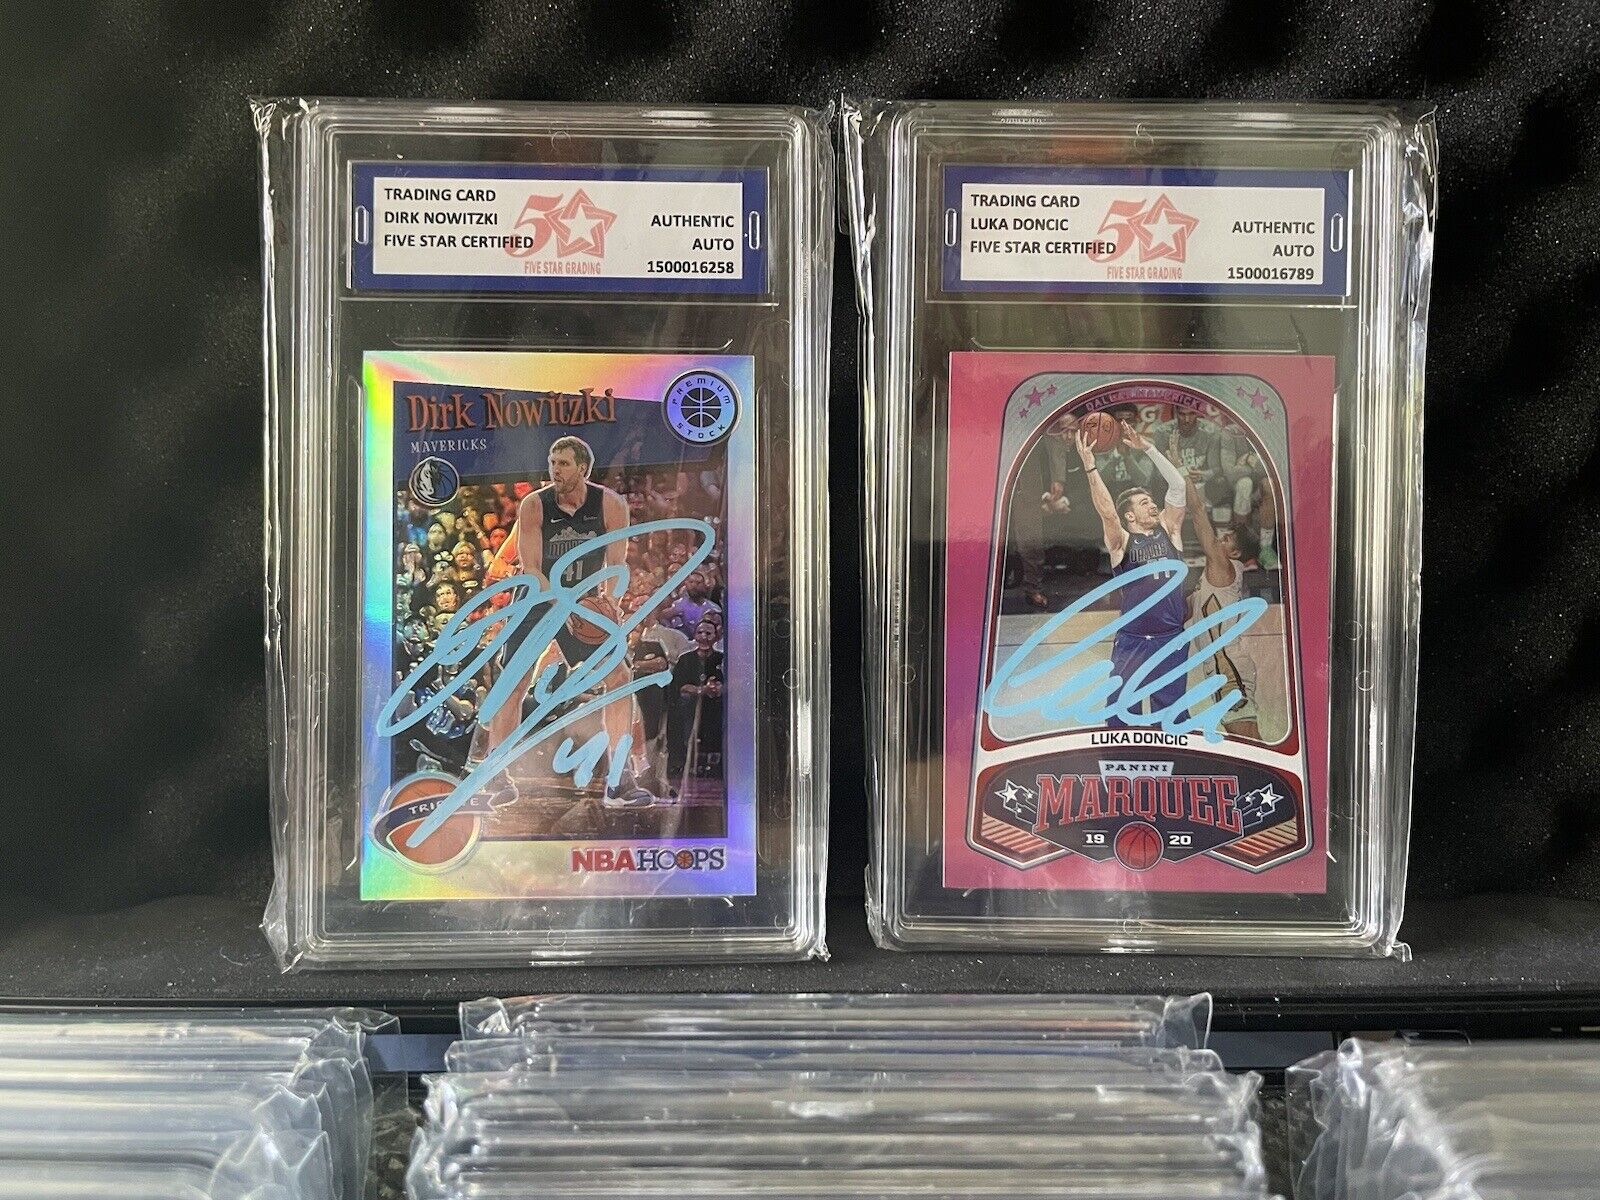 Luka Doncic 2020 Autographed Card PSA 10 Pop1 and Dirk Nowitzki signed card.